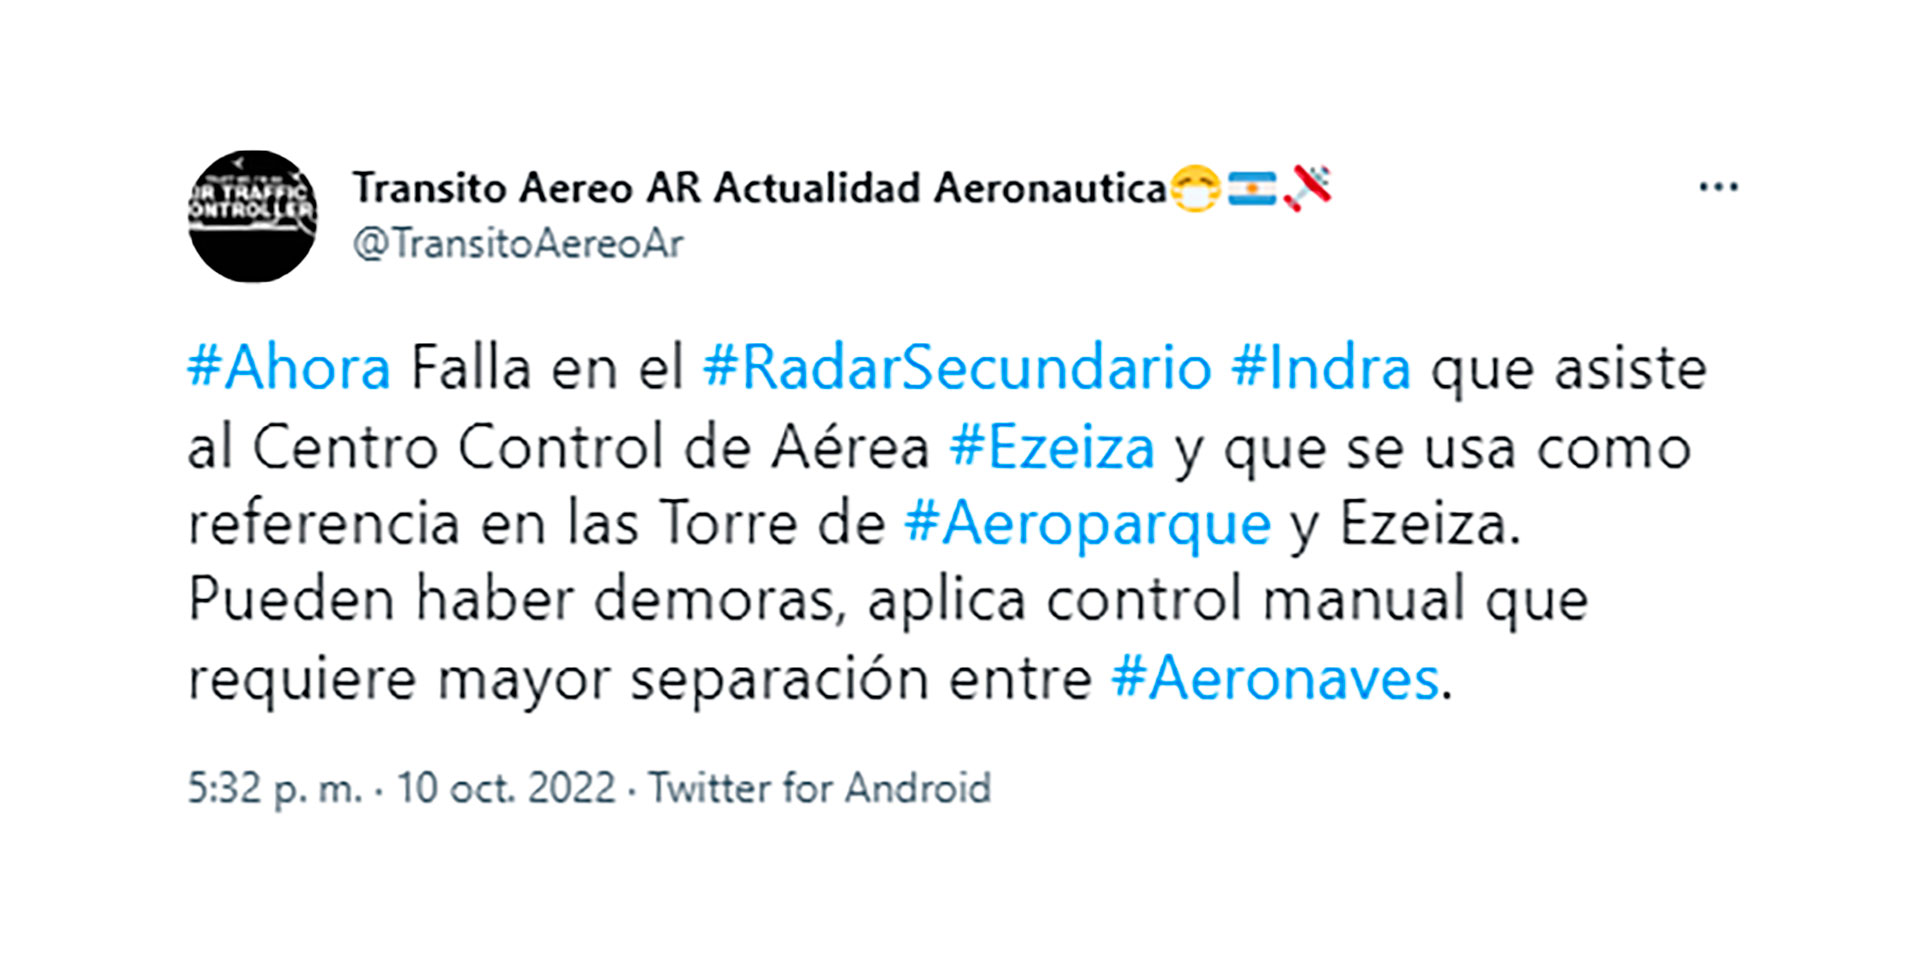 The fault was generated in the secondary radar that assists the Ezeiza Control Center and is used as a reference in the Aeroparque and Ezeiza towers.